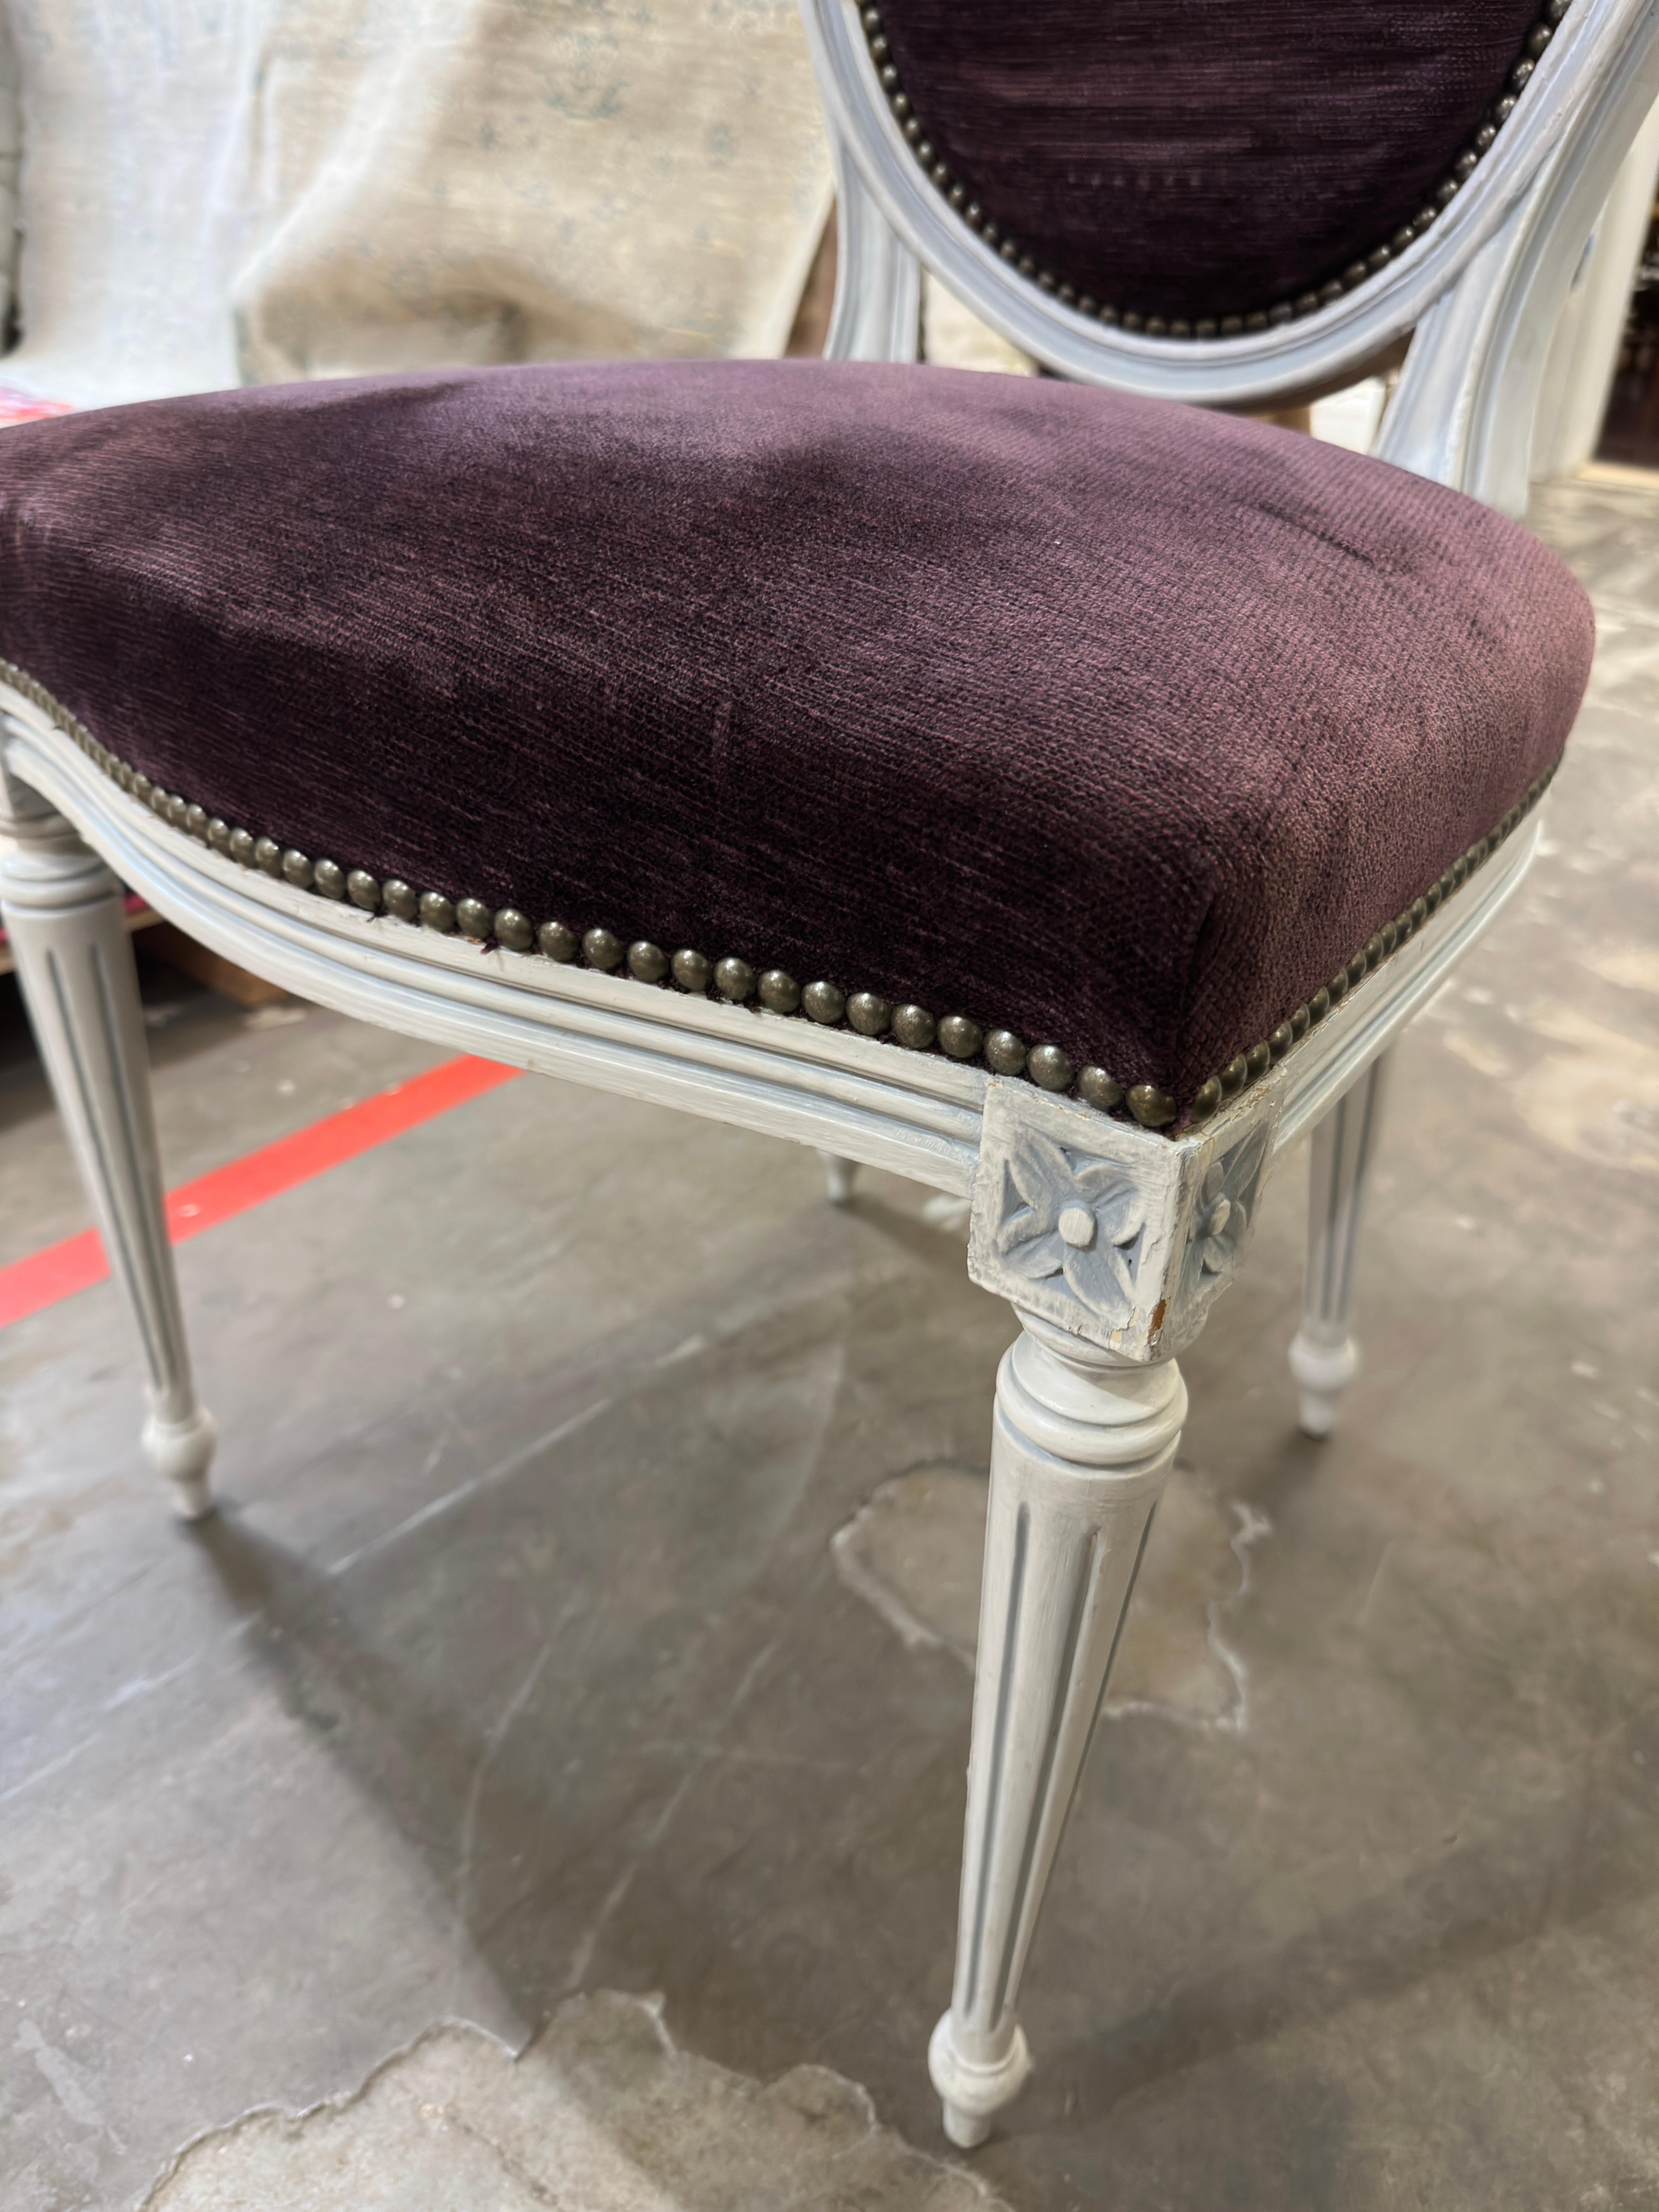 This is a set of eight (8) French dining chairs is in the Louis XV style. Each chair is beautifully upholstered in a rich and dark purple currant velvet with the wood in a whitewashed finish. Each chair is very sturdy, no visible damage and the